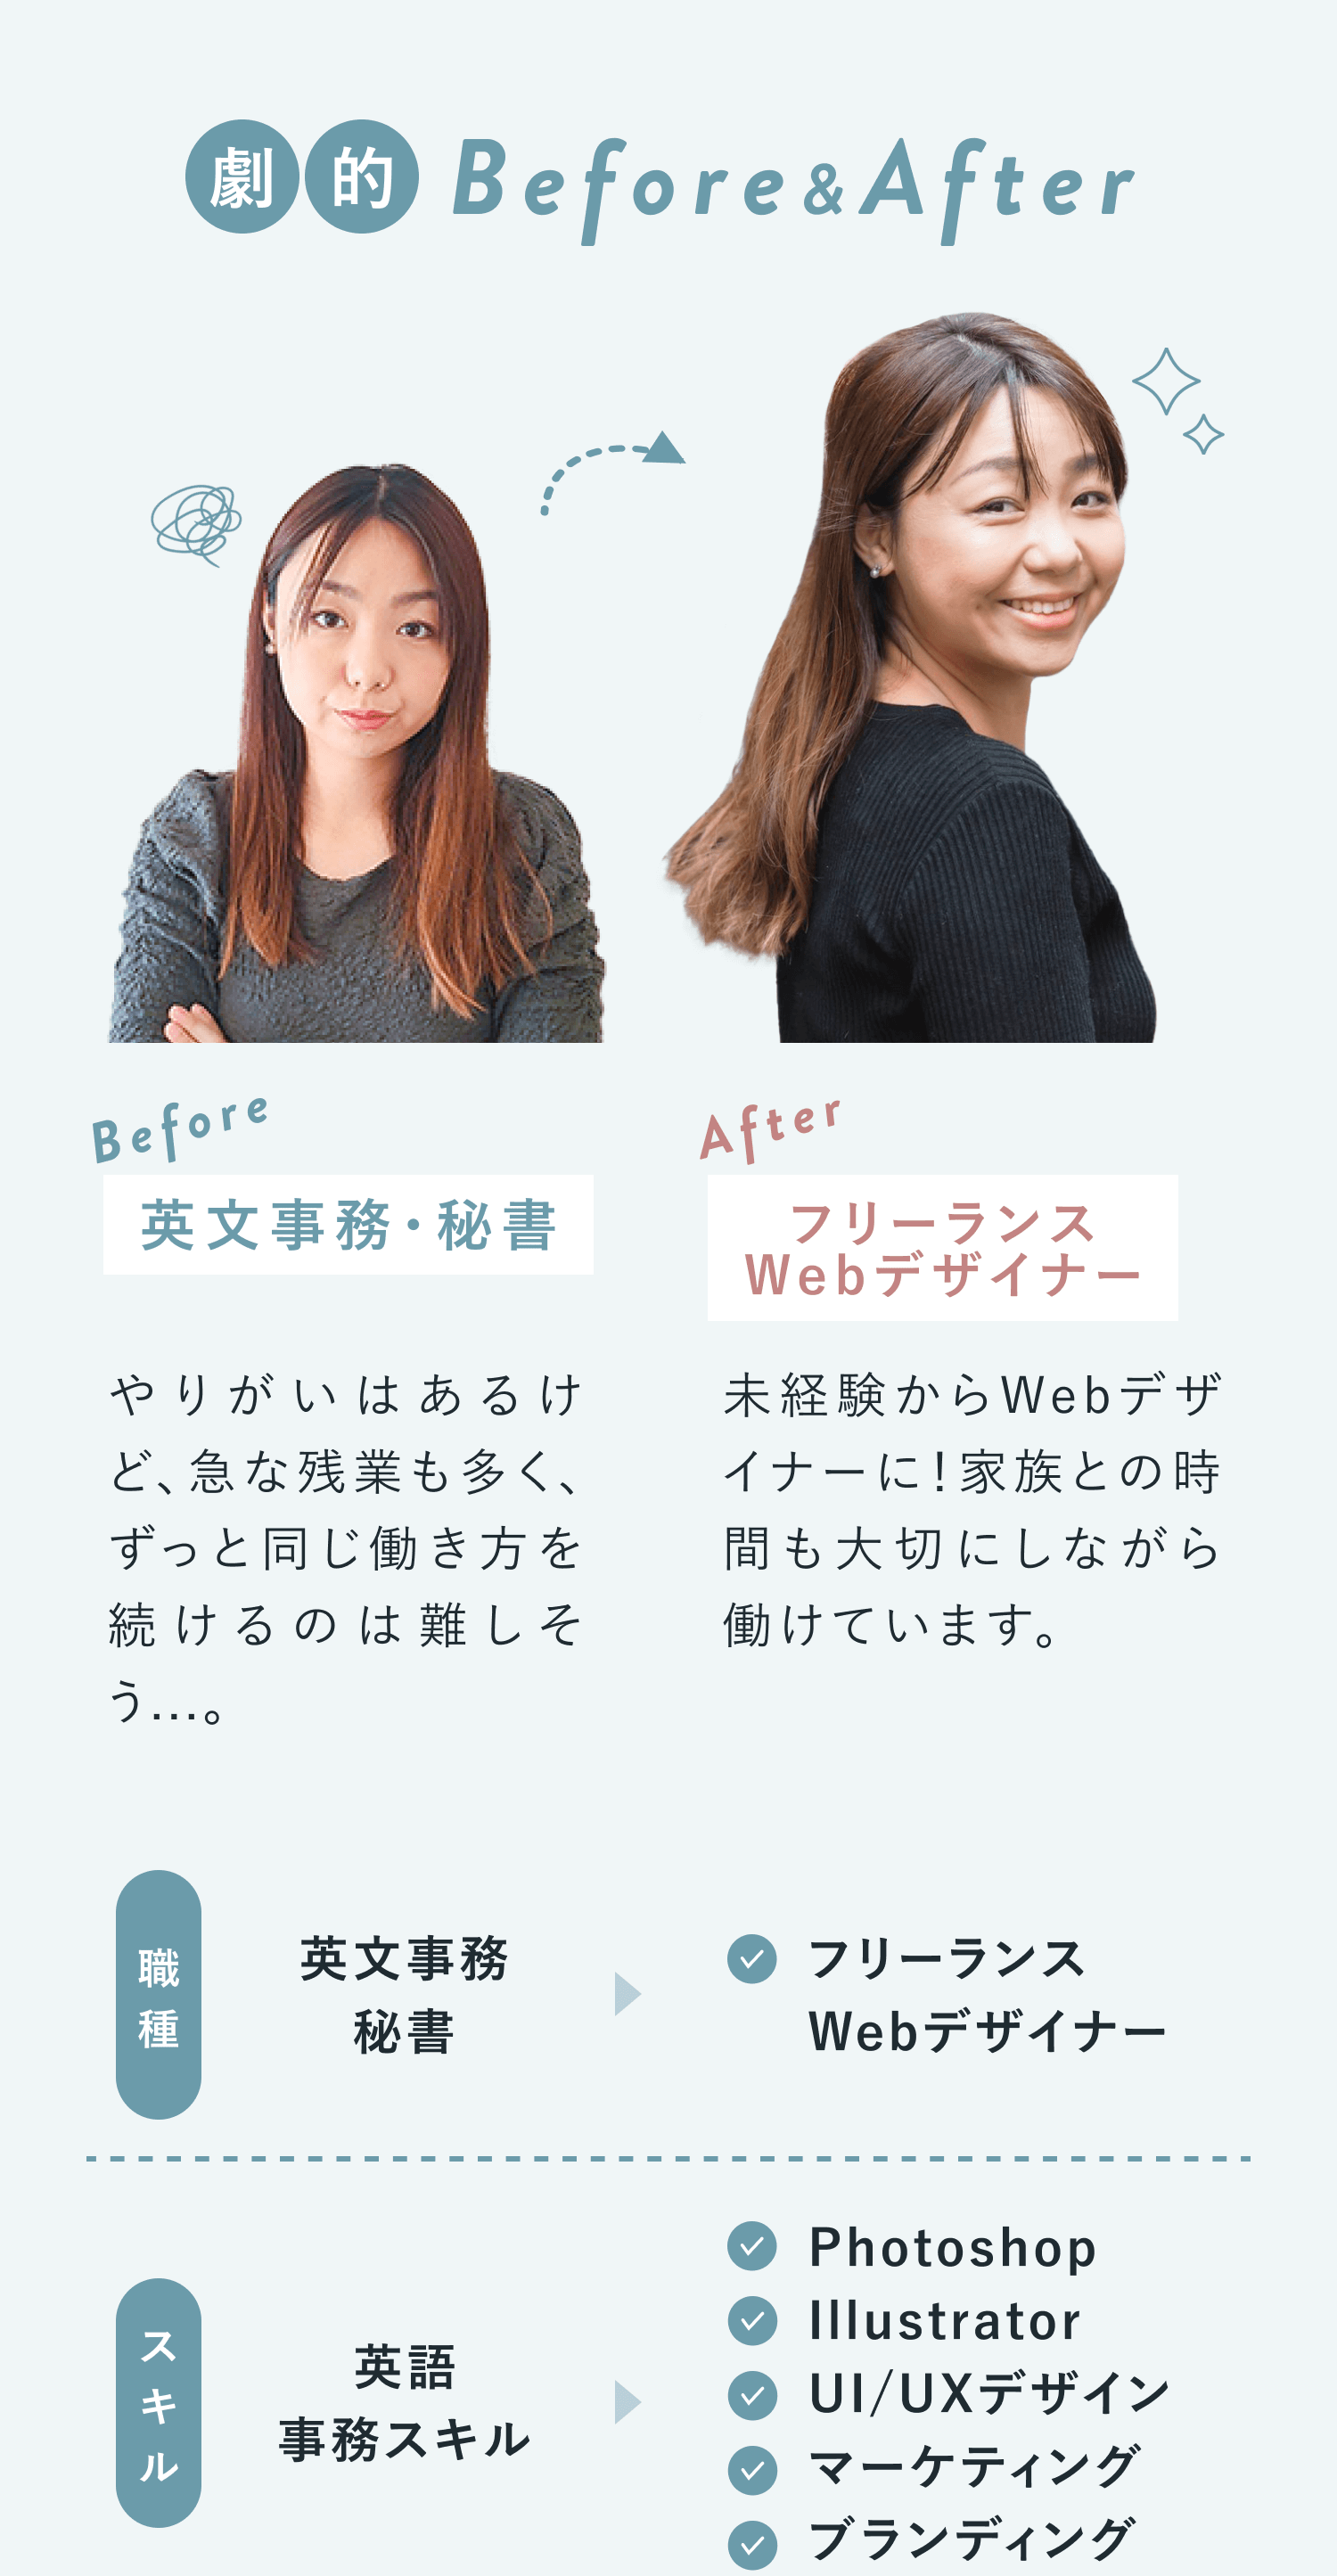 Reinaさん劇的Before&After